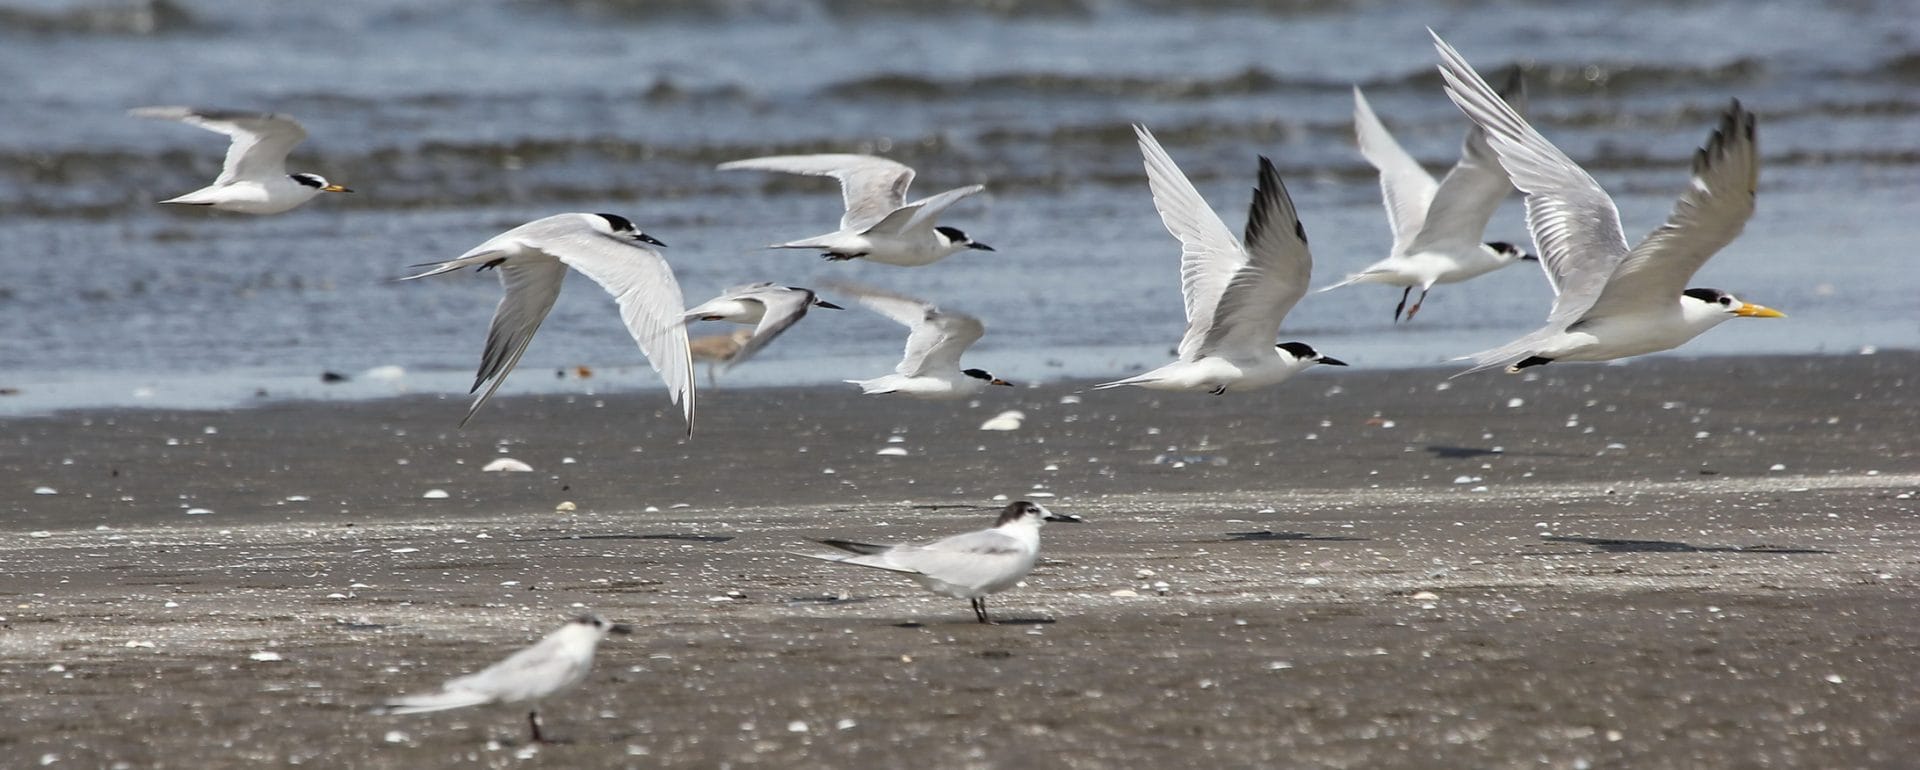 Little Tern on the left, Common Tern in the center, and Great Created Tern on the right. Photo by Christian Perez.